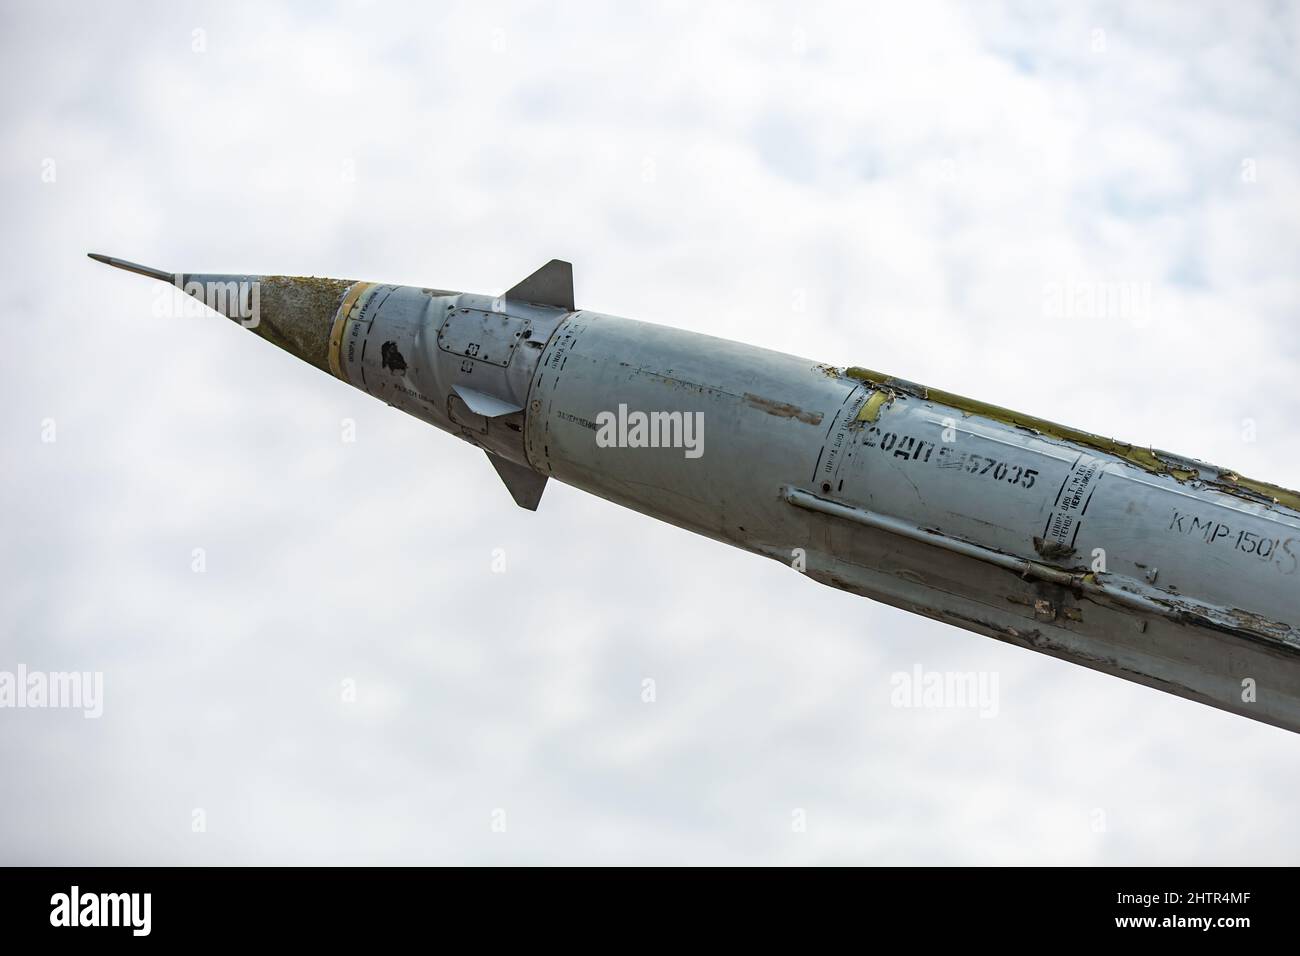 Russian rocket offensive weapon deployed and ready to fire Stock Photo